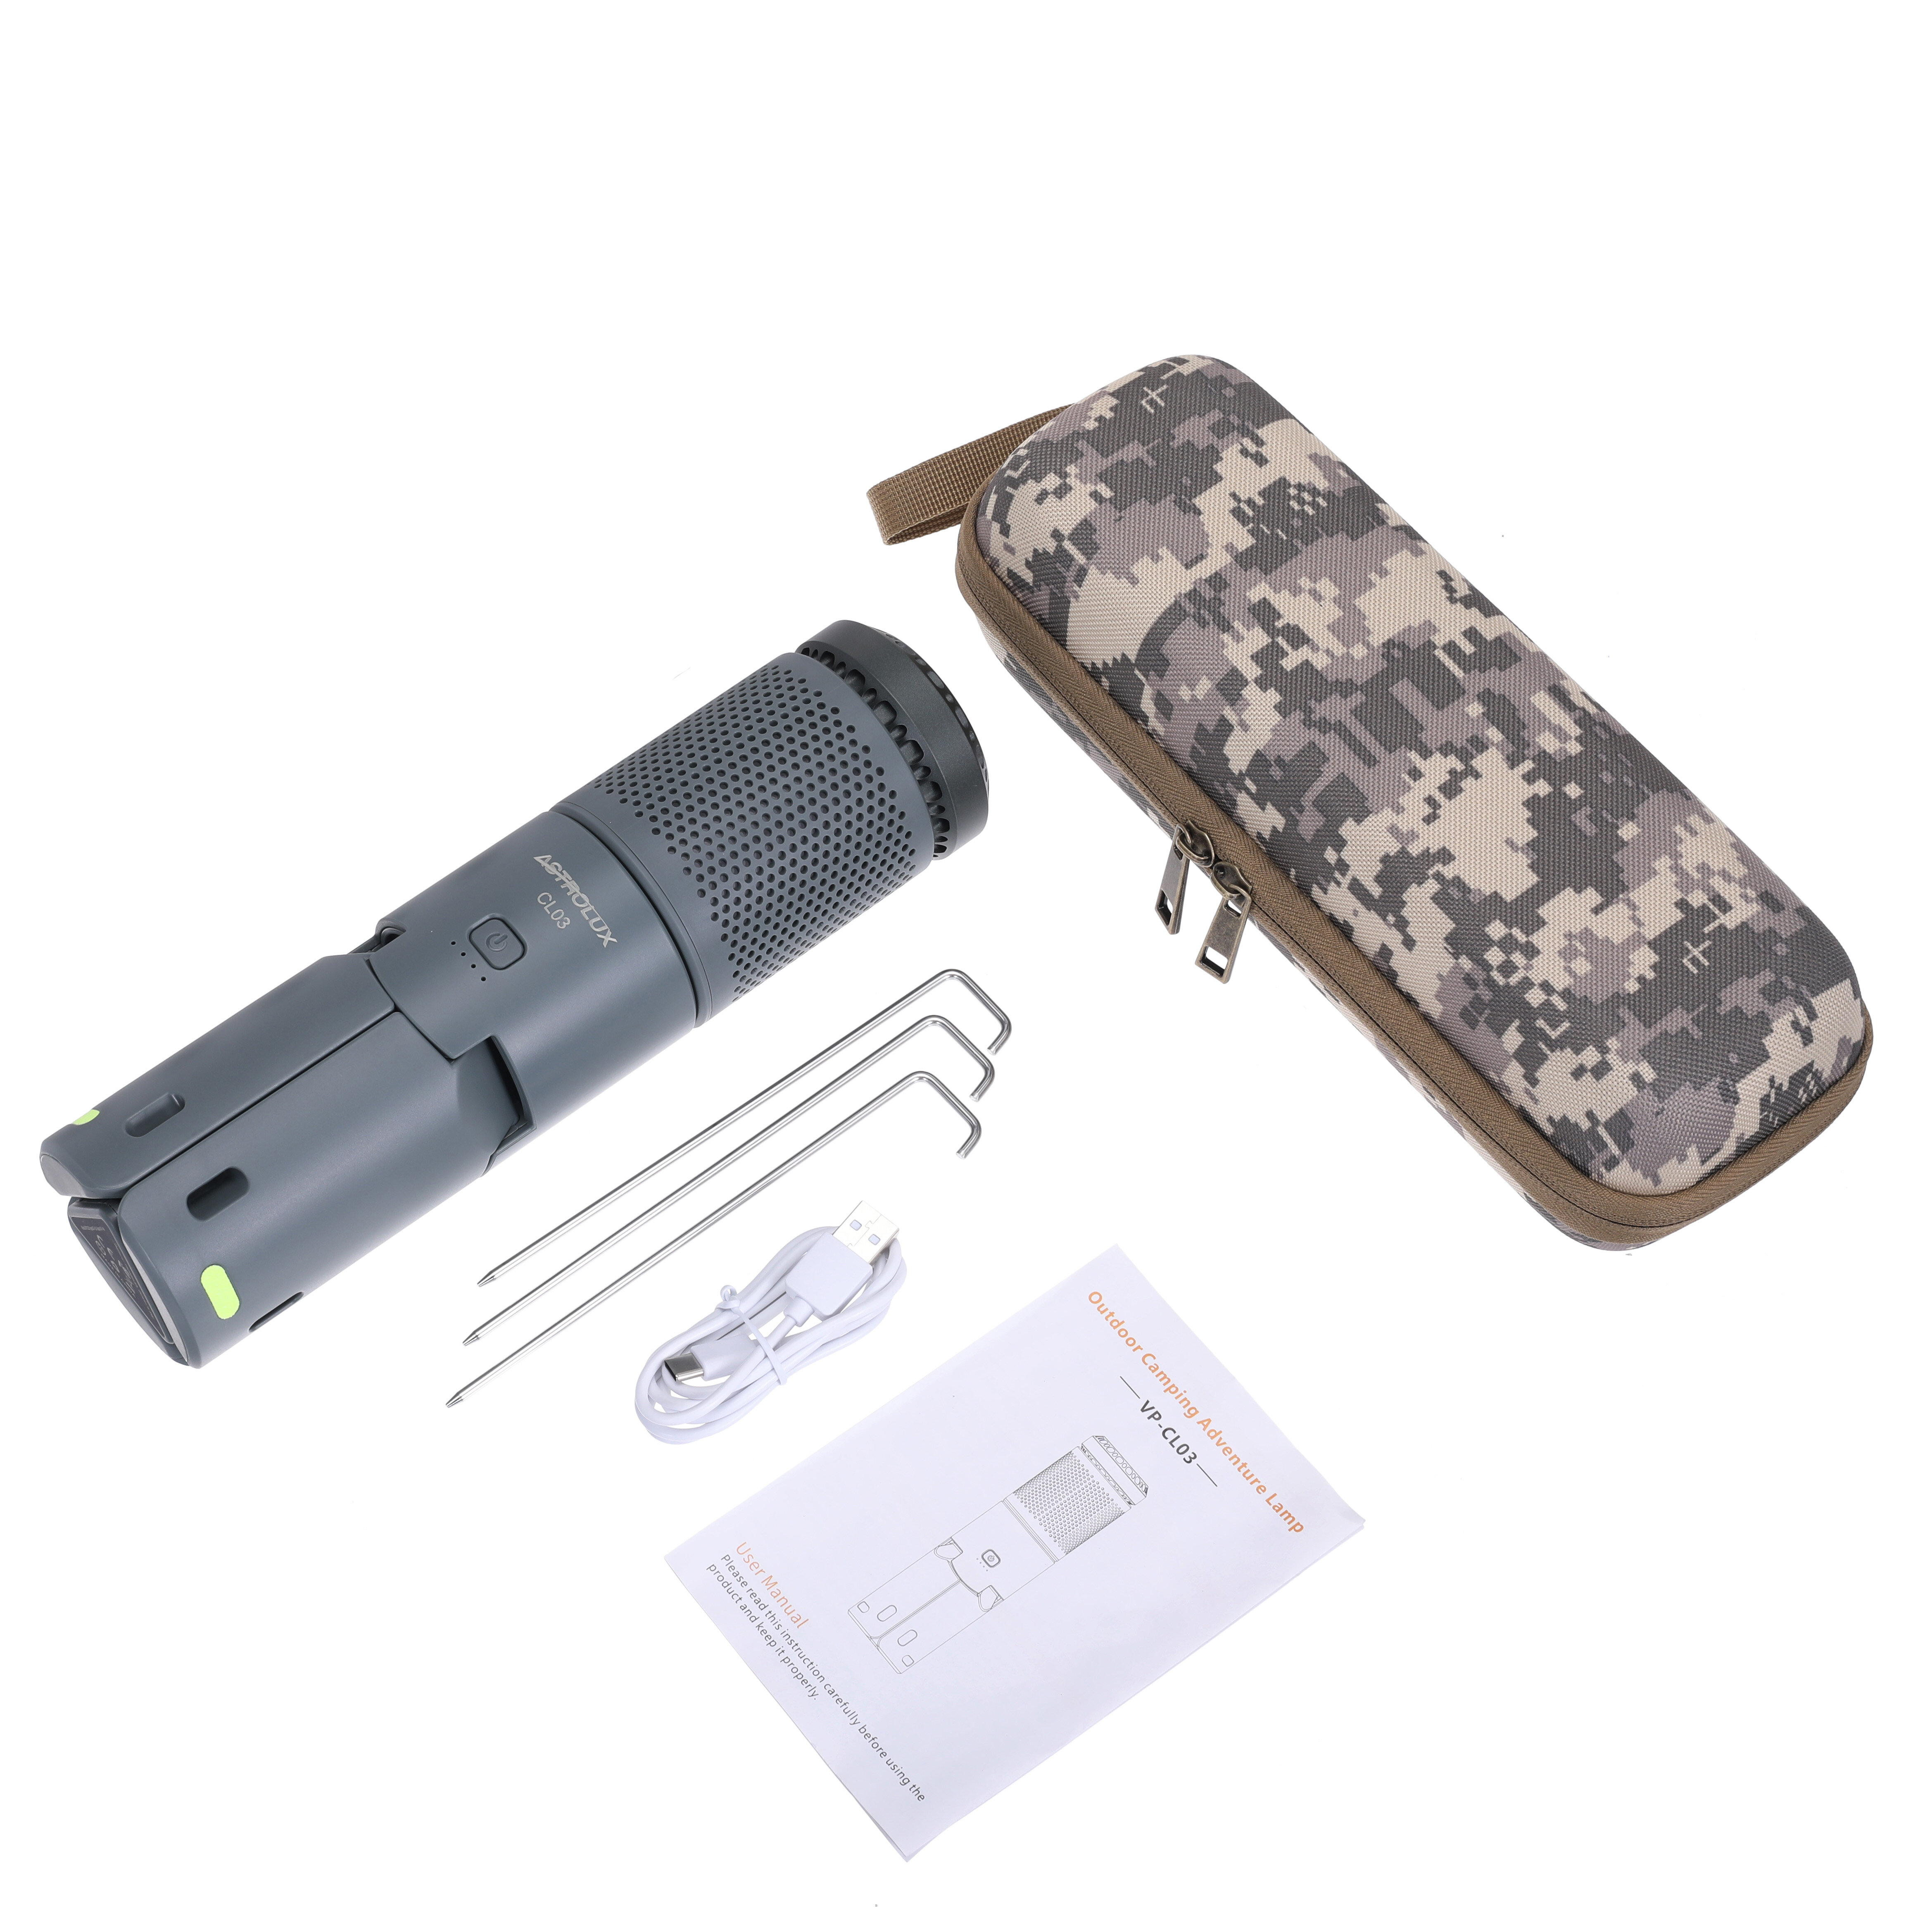 best price,astrolux,cl03,telescopic,camping,light,10000mah,type,rechargeable,ip65,discount